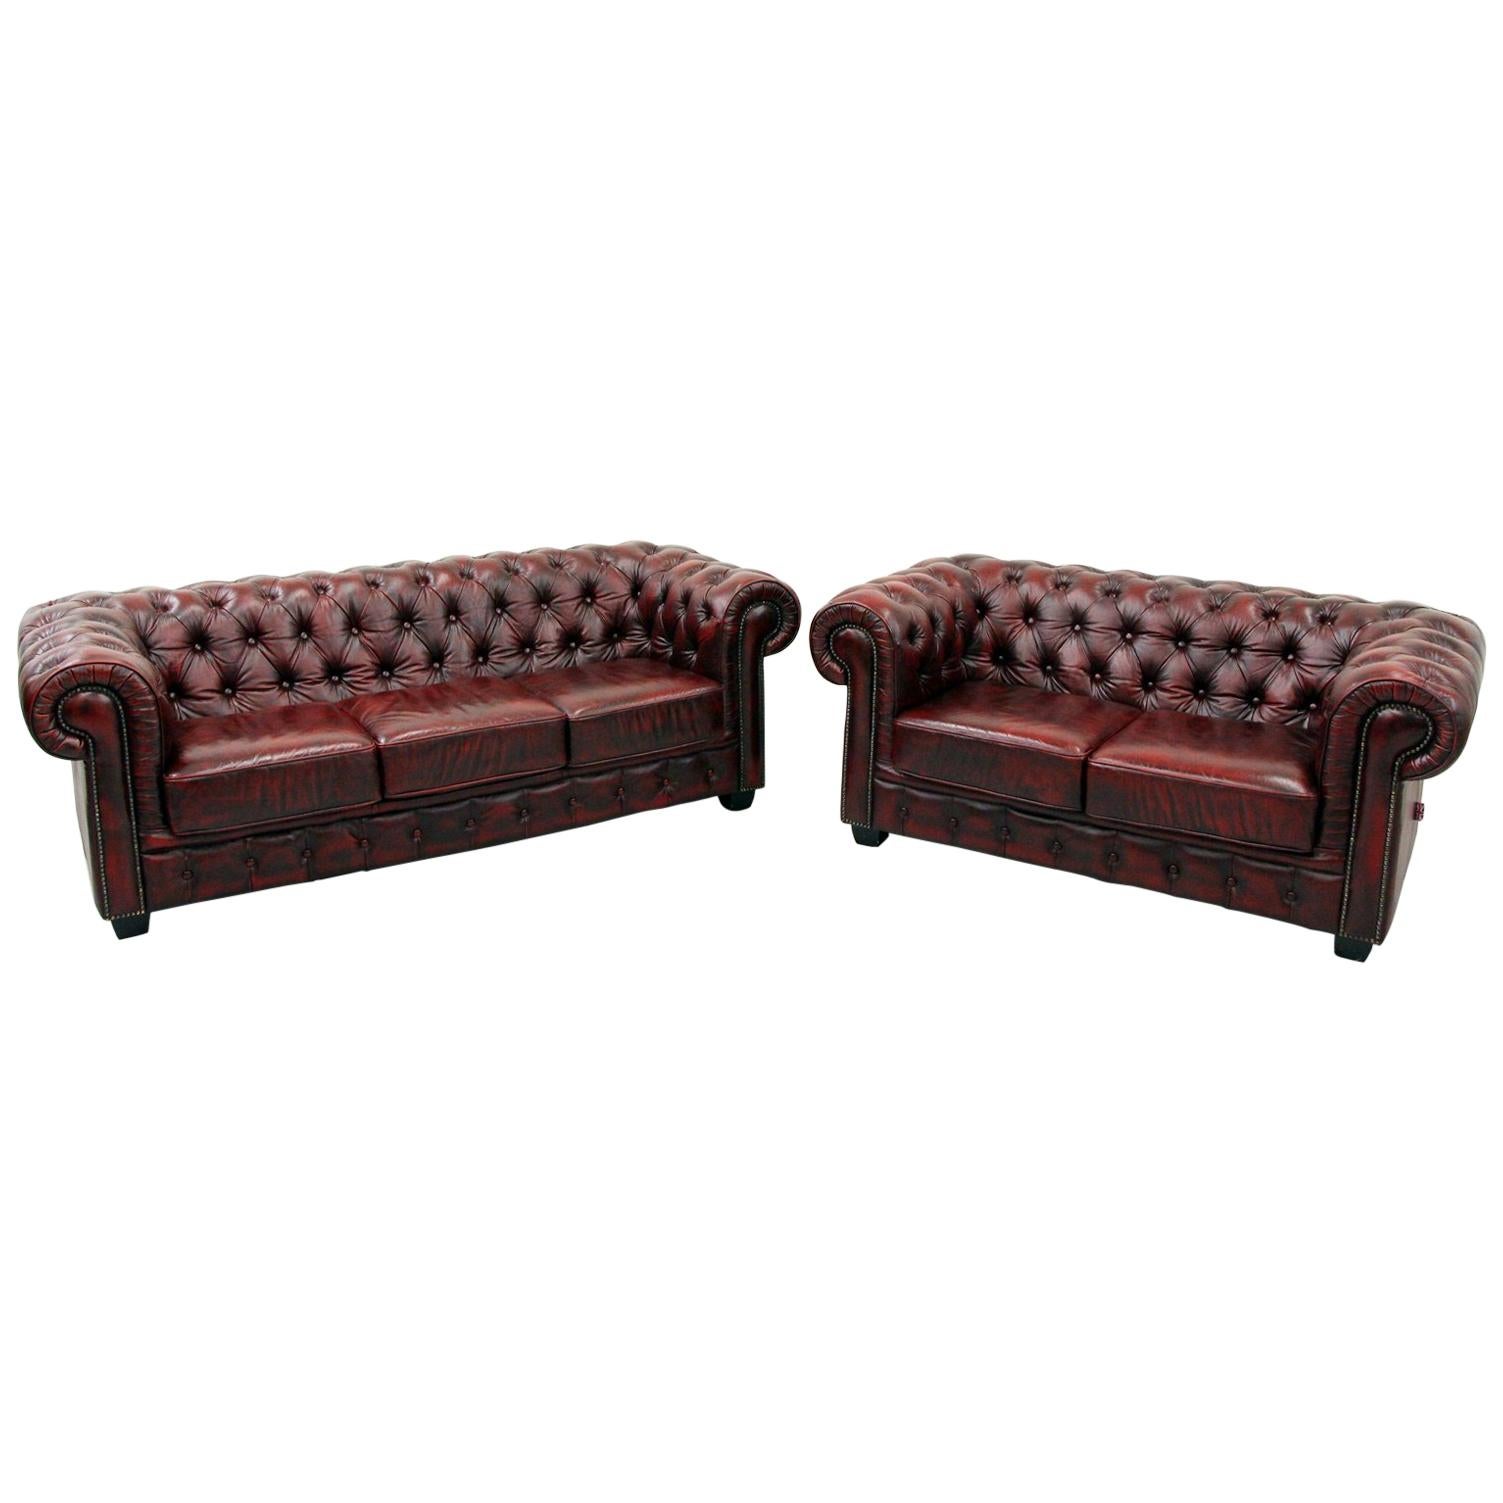 2 Chesterfield Sofa Leather Antique Vintage Couch English Chippendale im Angebot